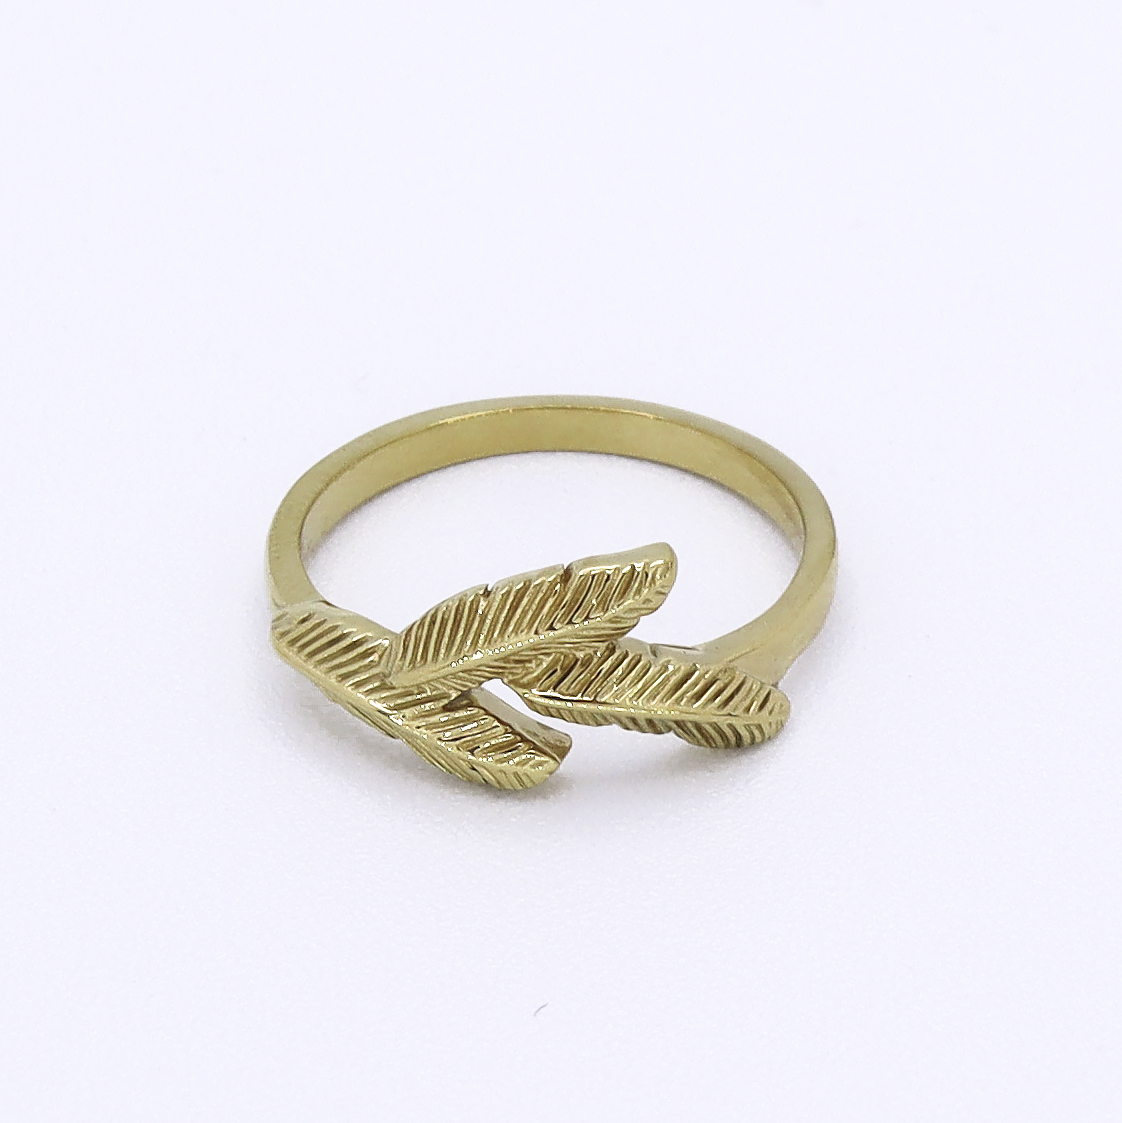 Soar with Joy™ Ladies Ring in 14k Yellow Gold front-facing view without holder